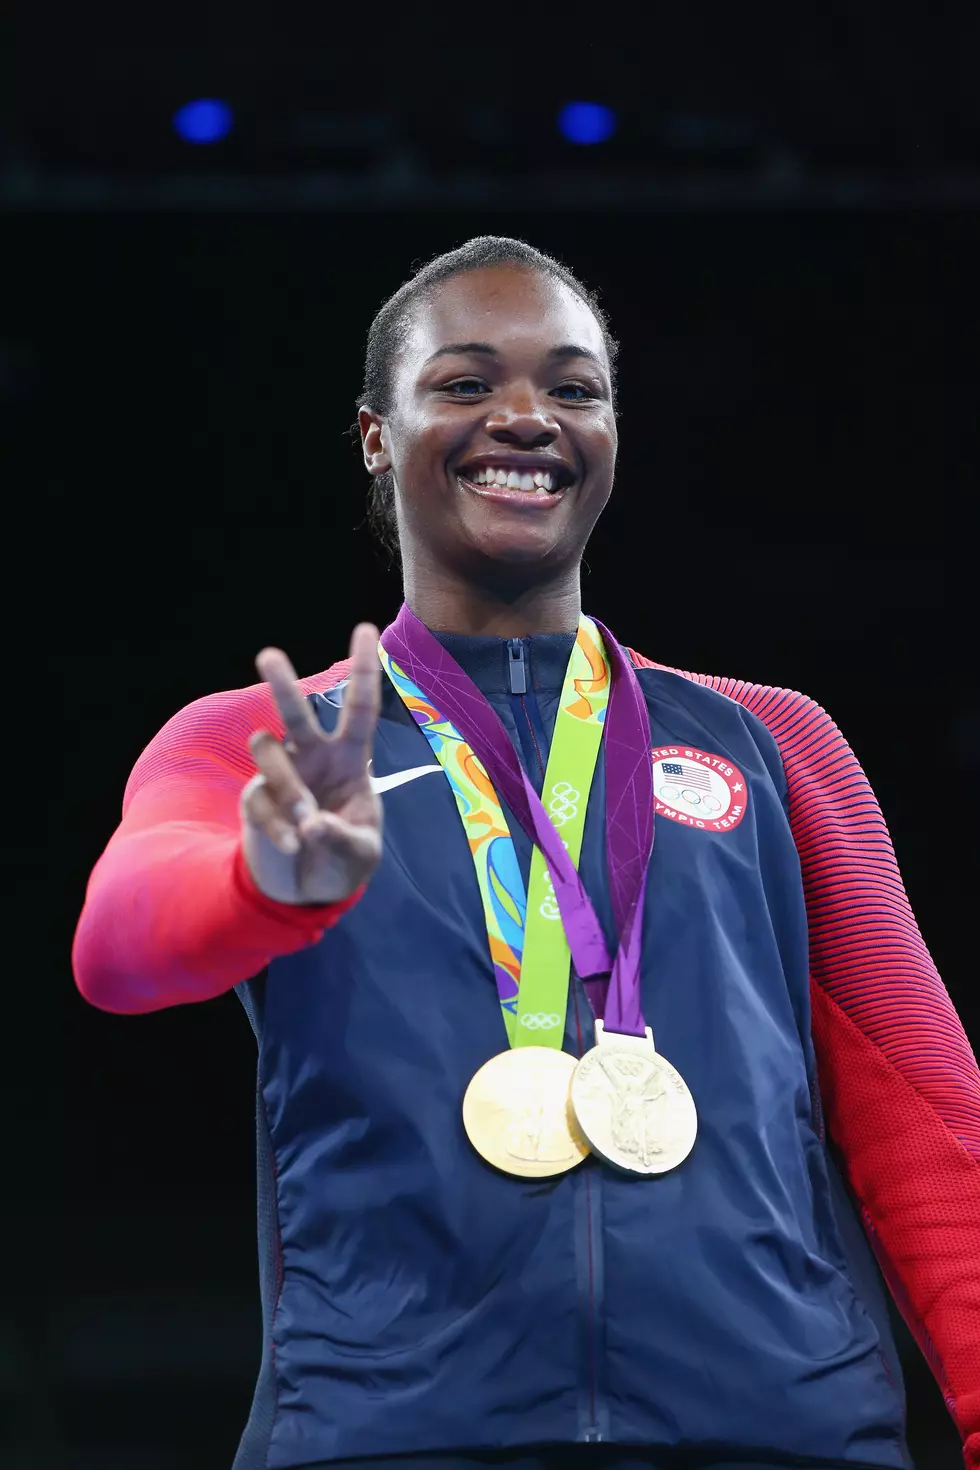 Video of Olympic Gold Medalist Boxer Claressa Shields Returning to Flint